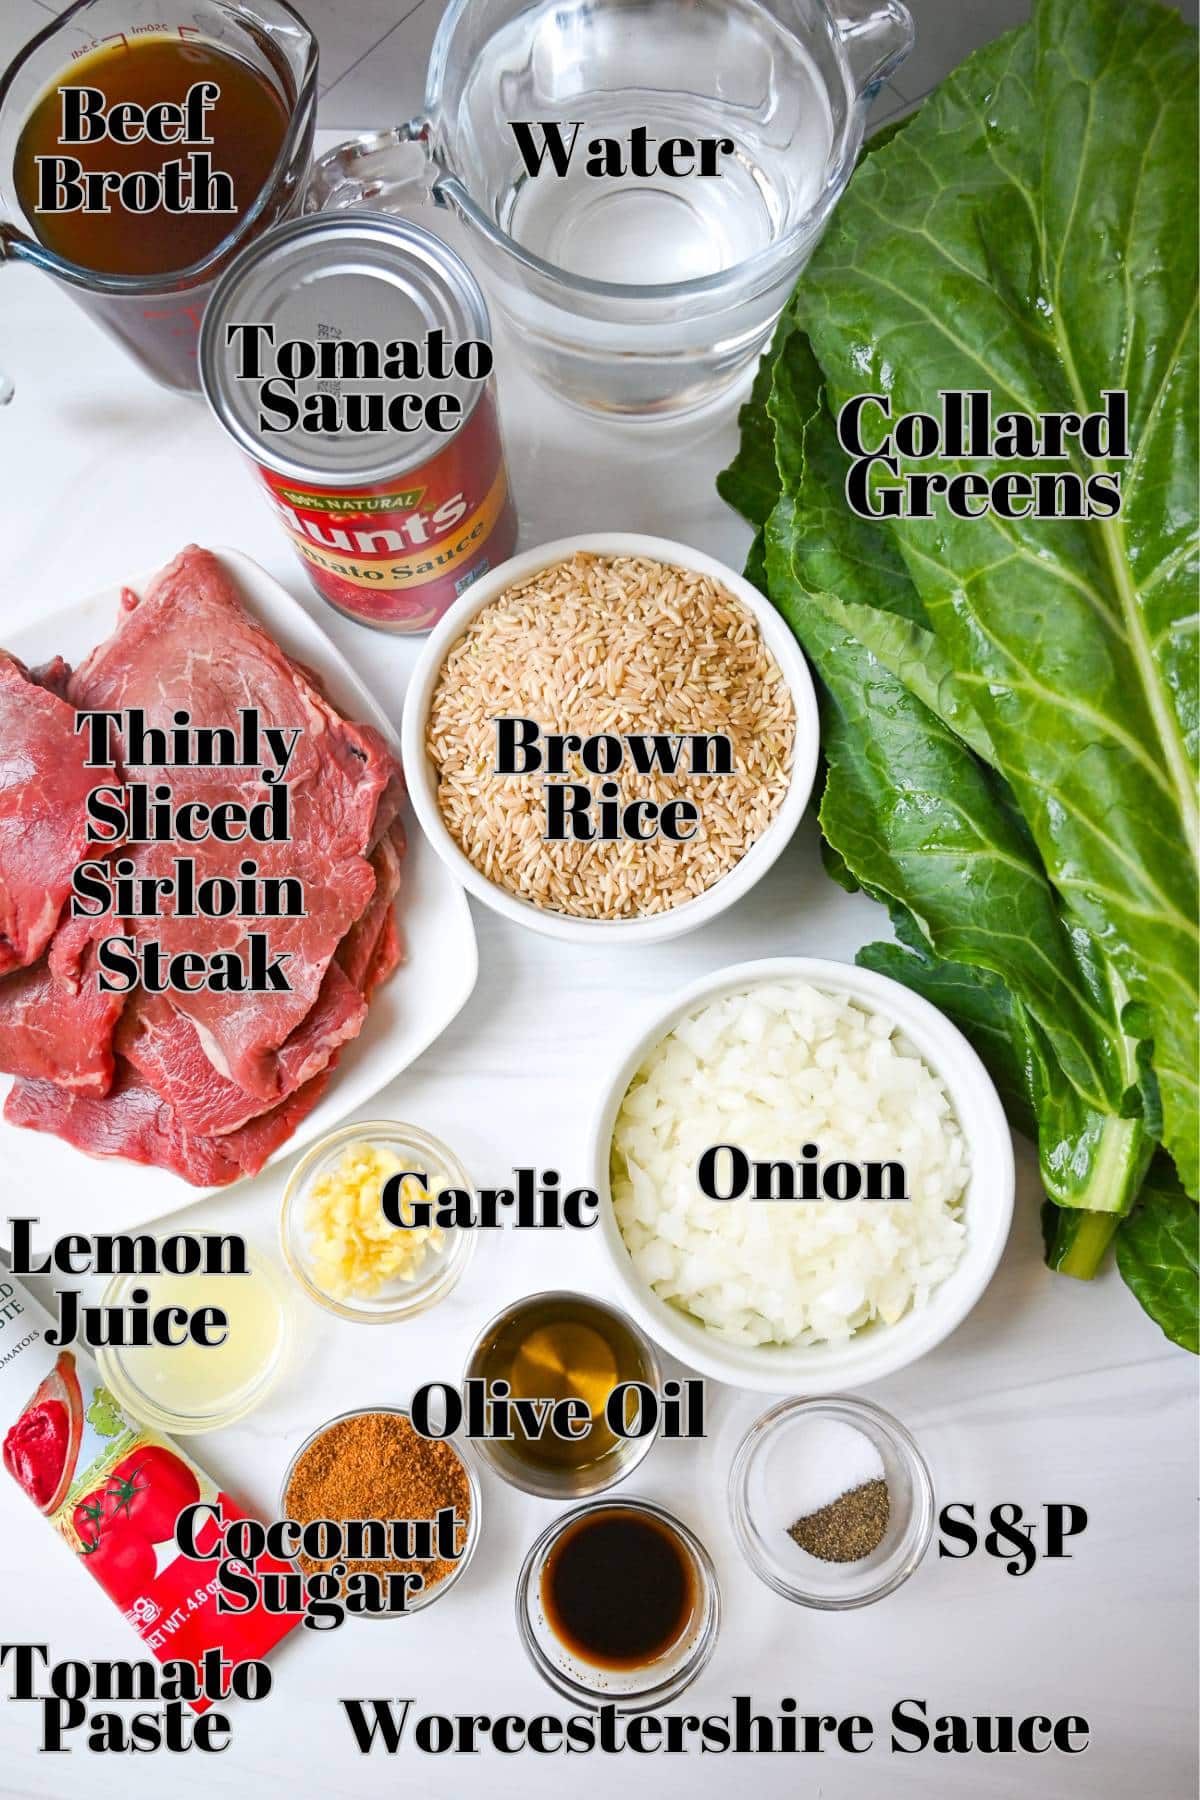 ingredients for stuffed collards measured out on a counter